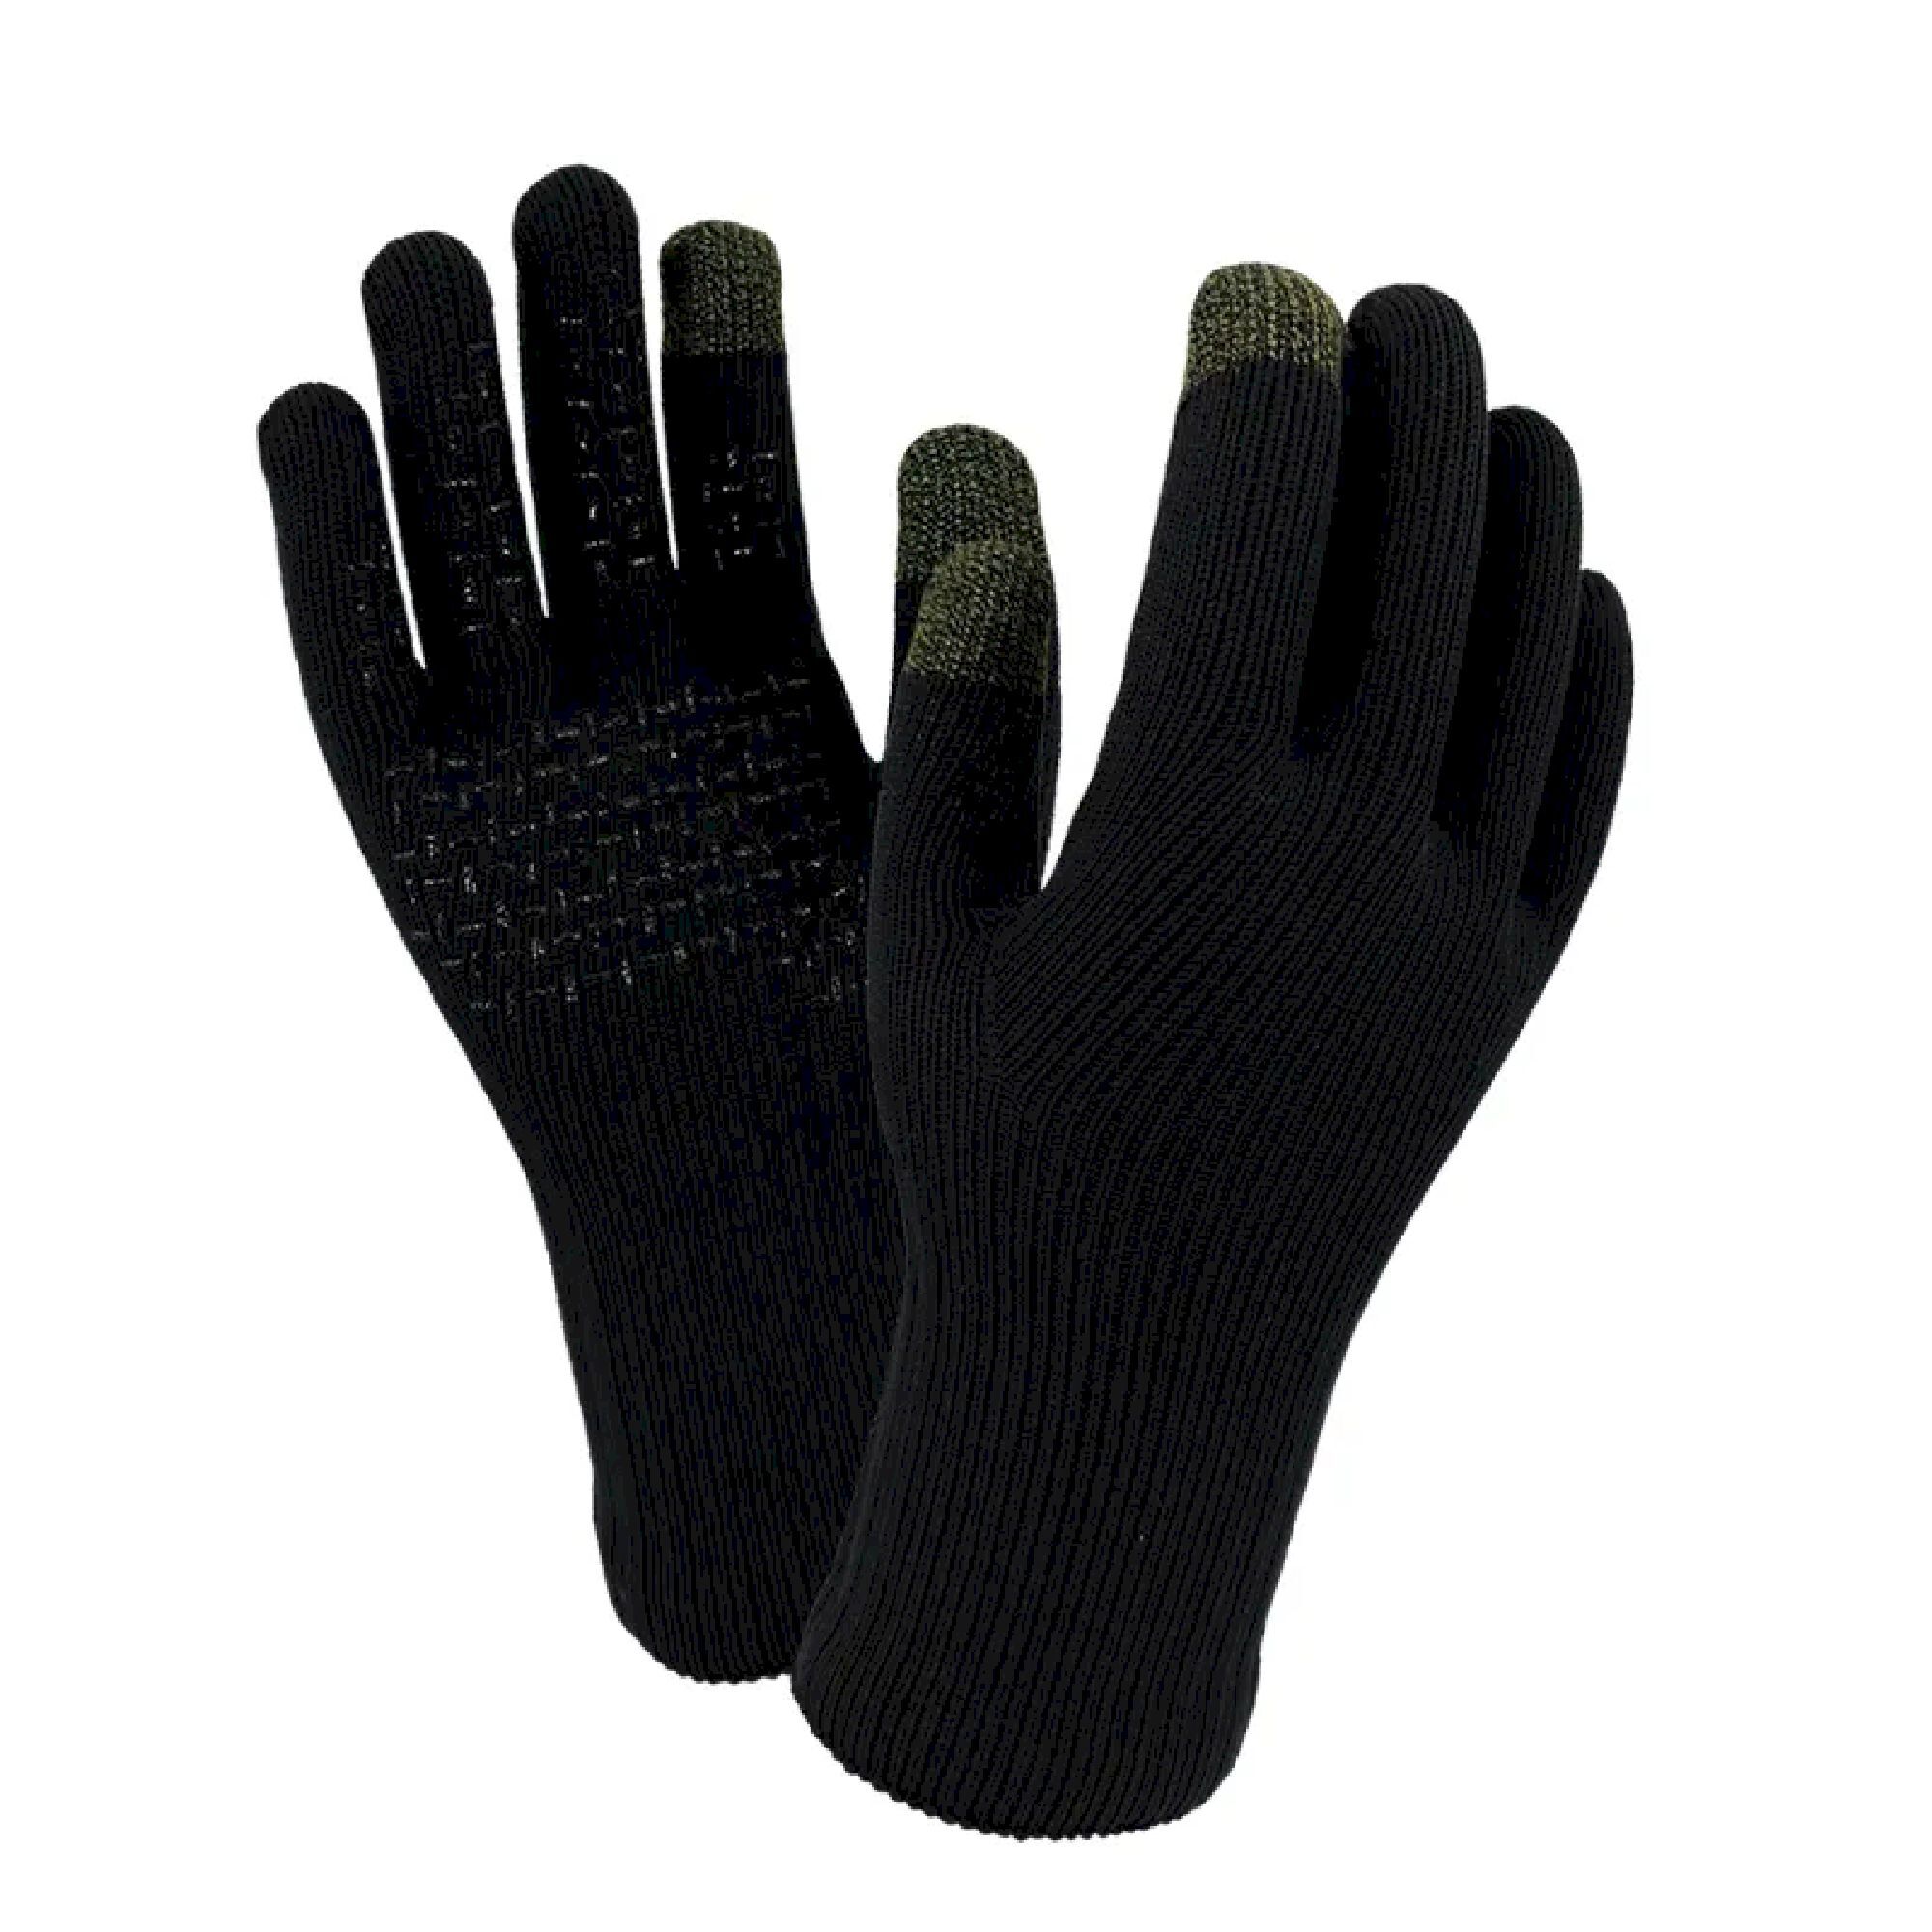 DexShell Thermfit 2.0 Gloves - Guantes impermeables | Hardloop